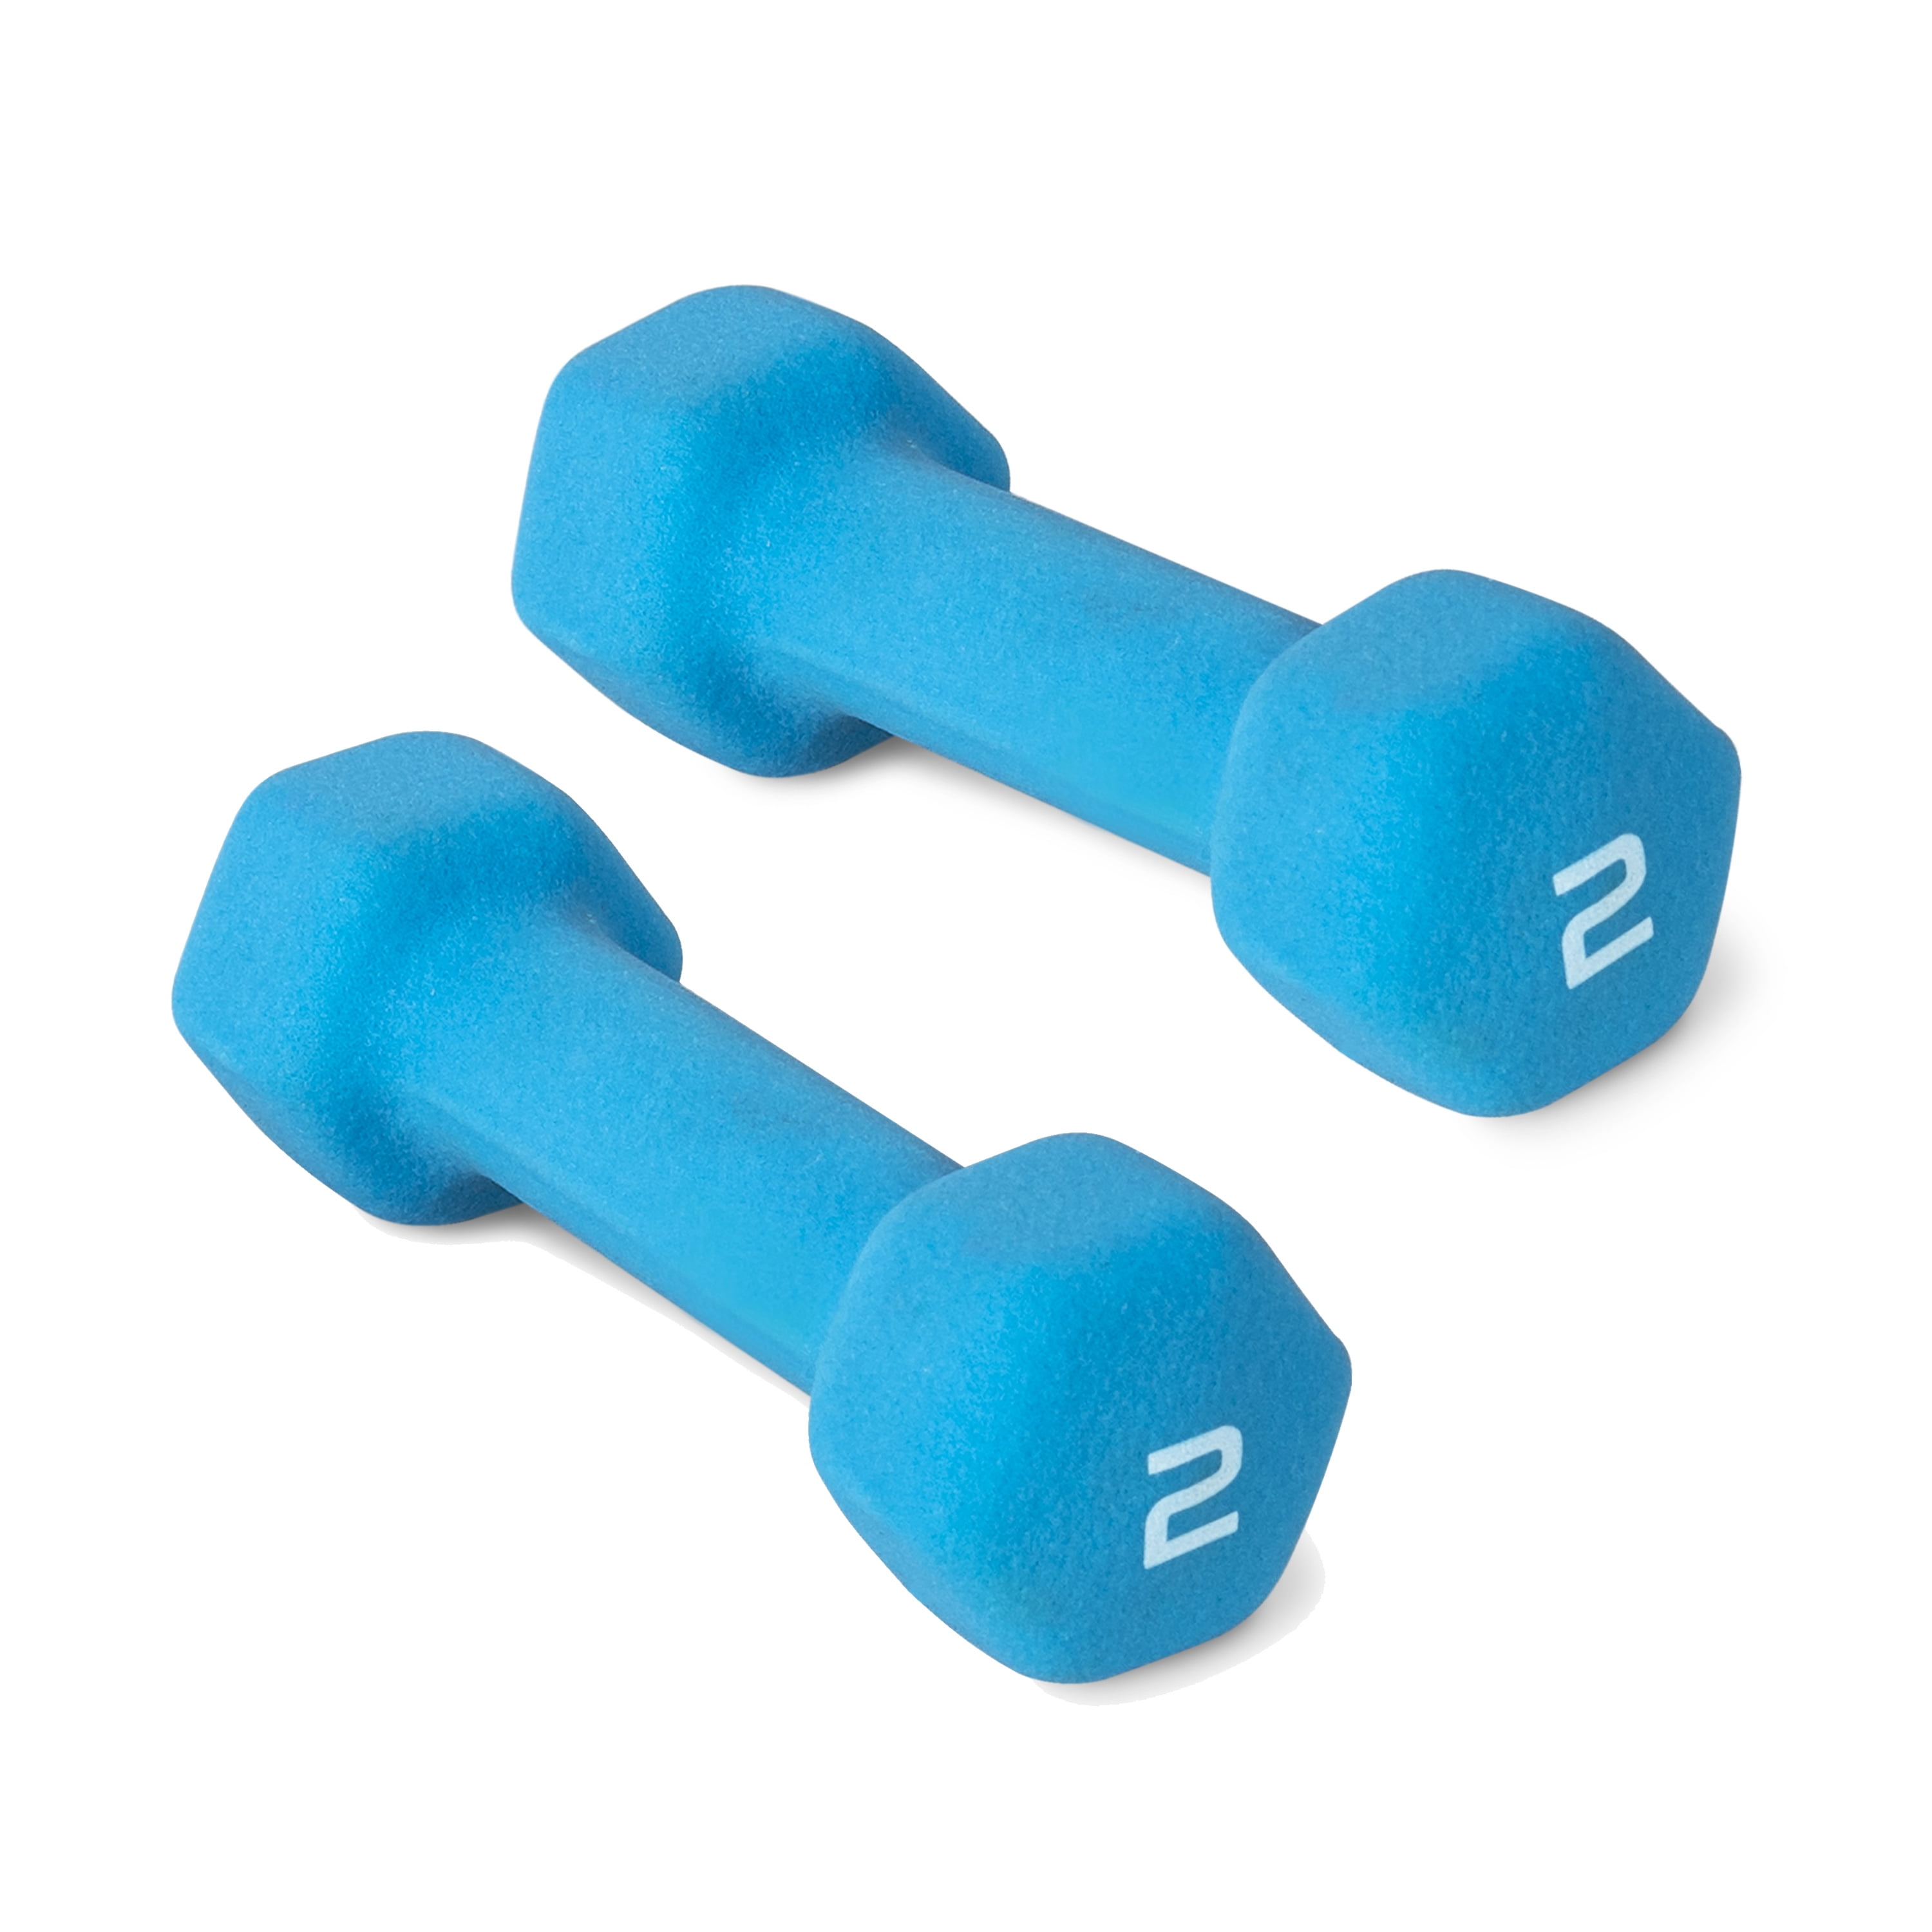 Details about   CAP Dumbbell Set 10 Lb Neoprene Coated Weights 